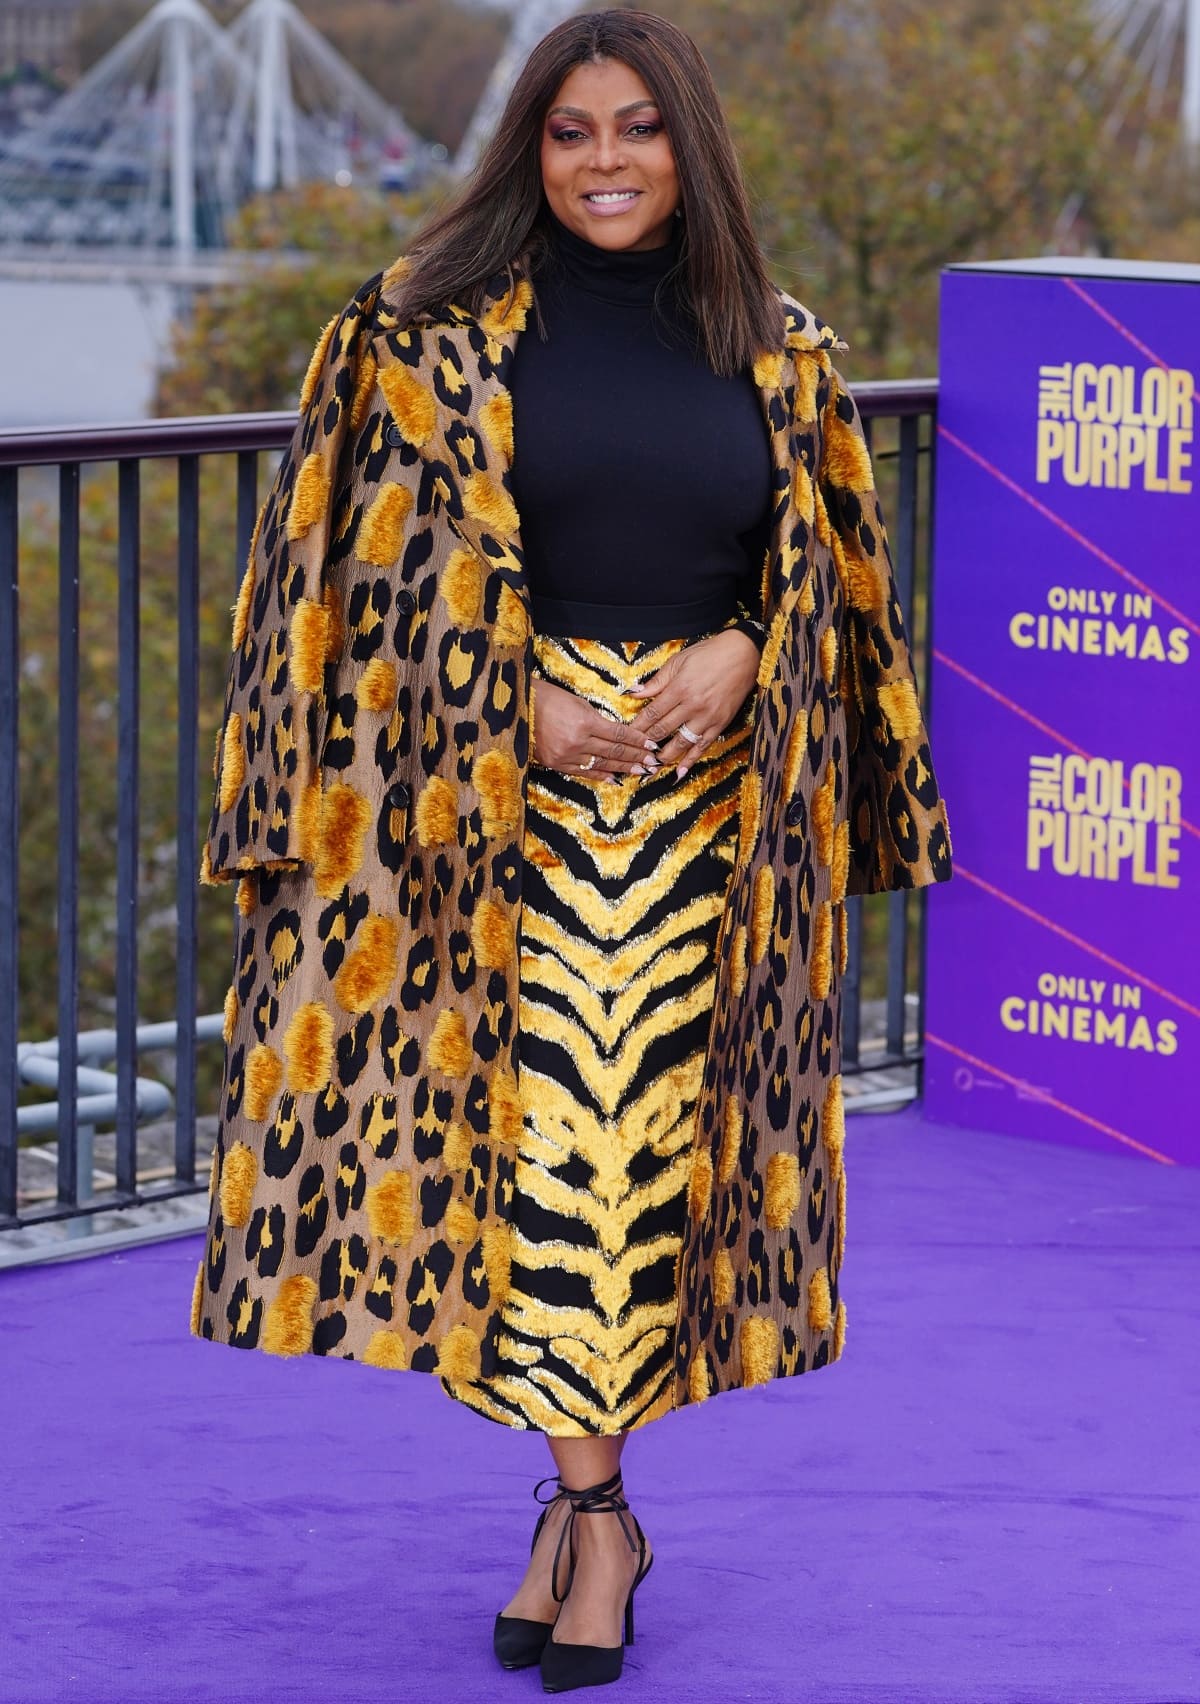 Taraji P. Henson wearing a mix of prints and hues in a Roberto Cavalli Fall 2022 ensemble featuring a black turtleneck with a zebra-print skirt and a leopard-print coat at the photocall for the cast of The Color Purple in London